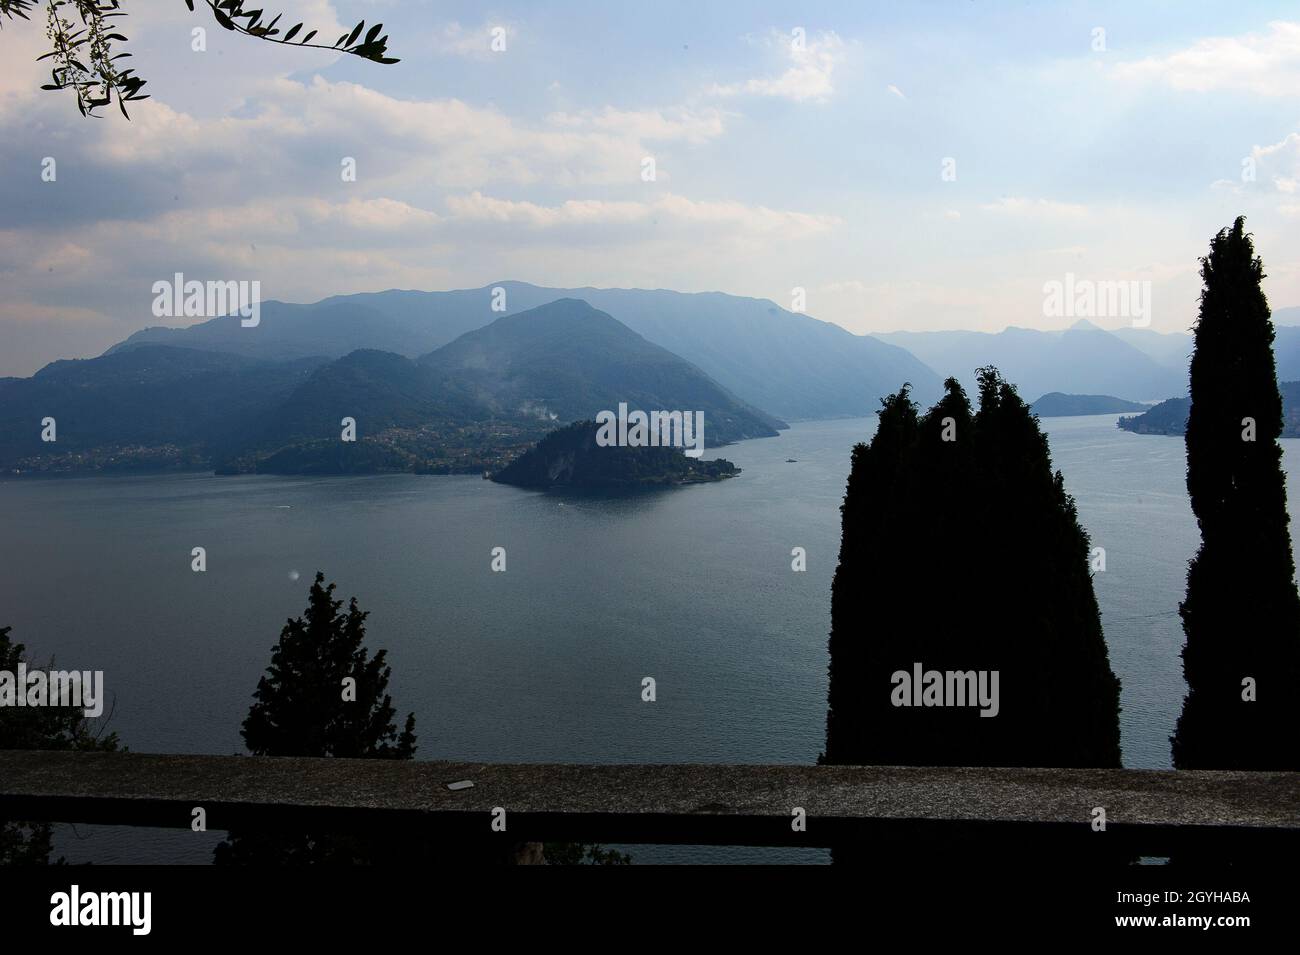 Europe, Italy, Lombardy, Lecco province, Lake Lario, Varenna, Vezio Castle and its ghosts. On the left the branch of Lake Lecco, on the right the bran Stock Photo